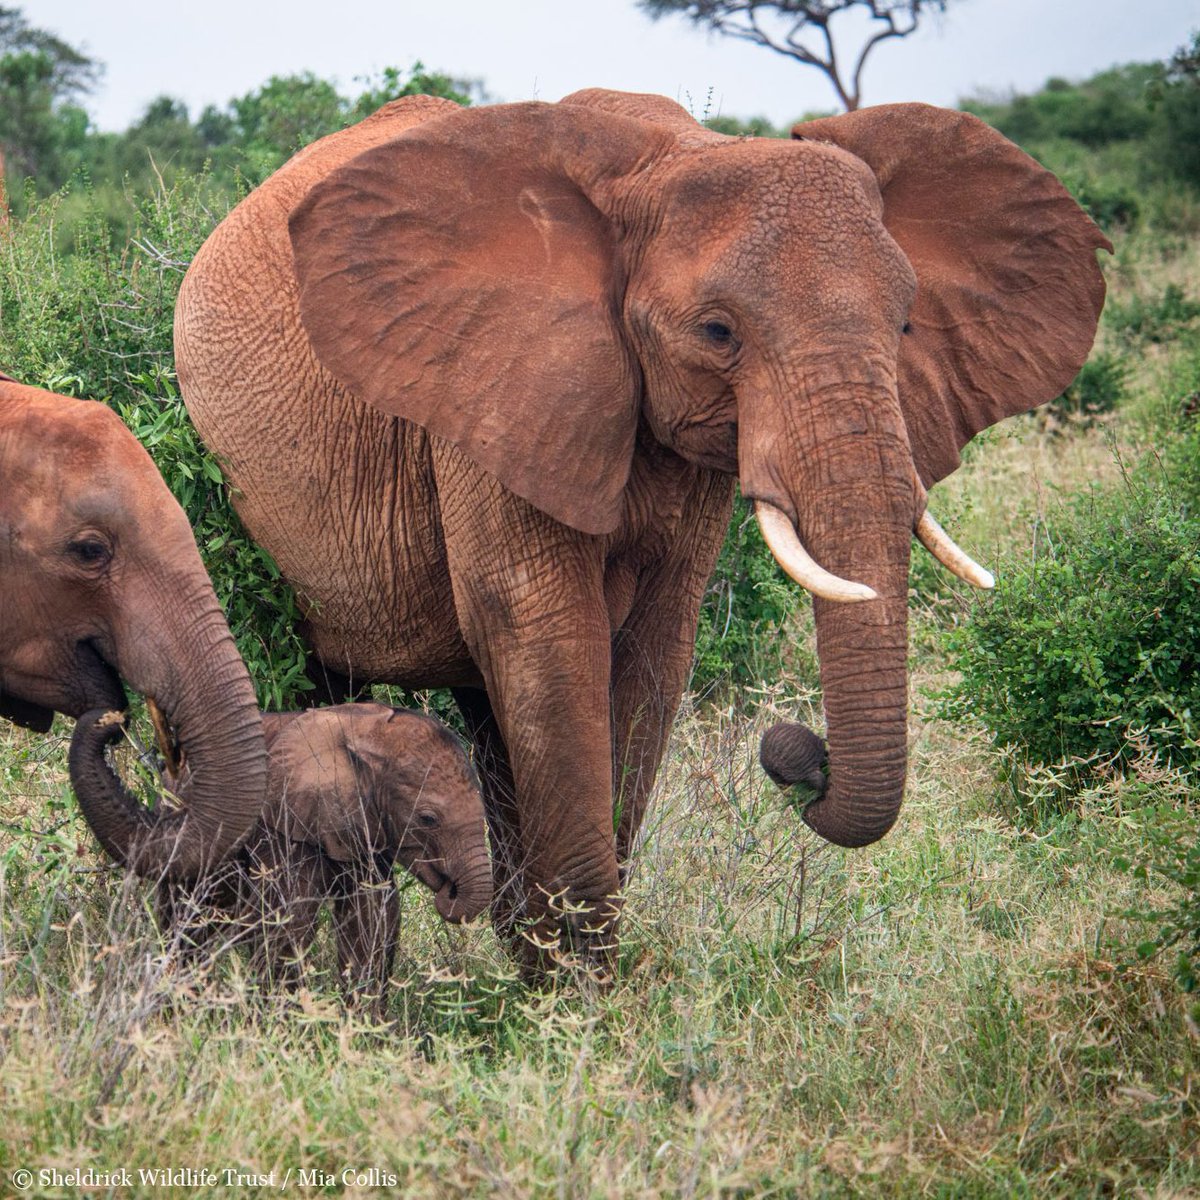 Mums are pretty incredible – especially elephant mums who carry their calves for a massive 22 months before giving birth! With #MothersDay this Sunday, why not say thank you to the maternal figure in your life by gifting them an elephant adoption: sheldrickwildlifetrust.org/mothers-day-ad… 🐘